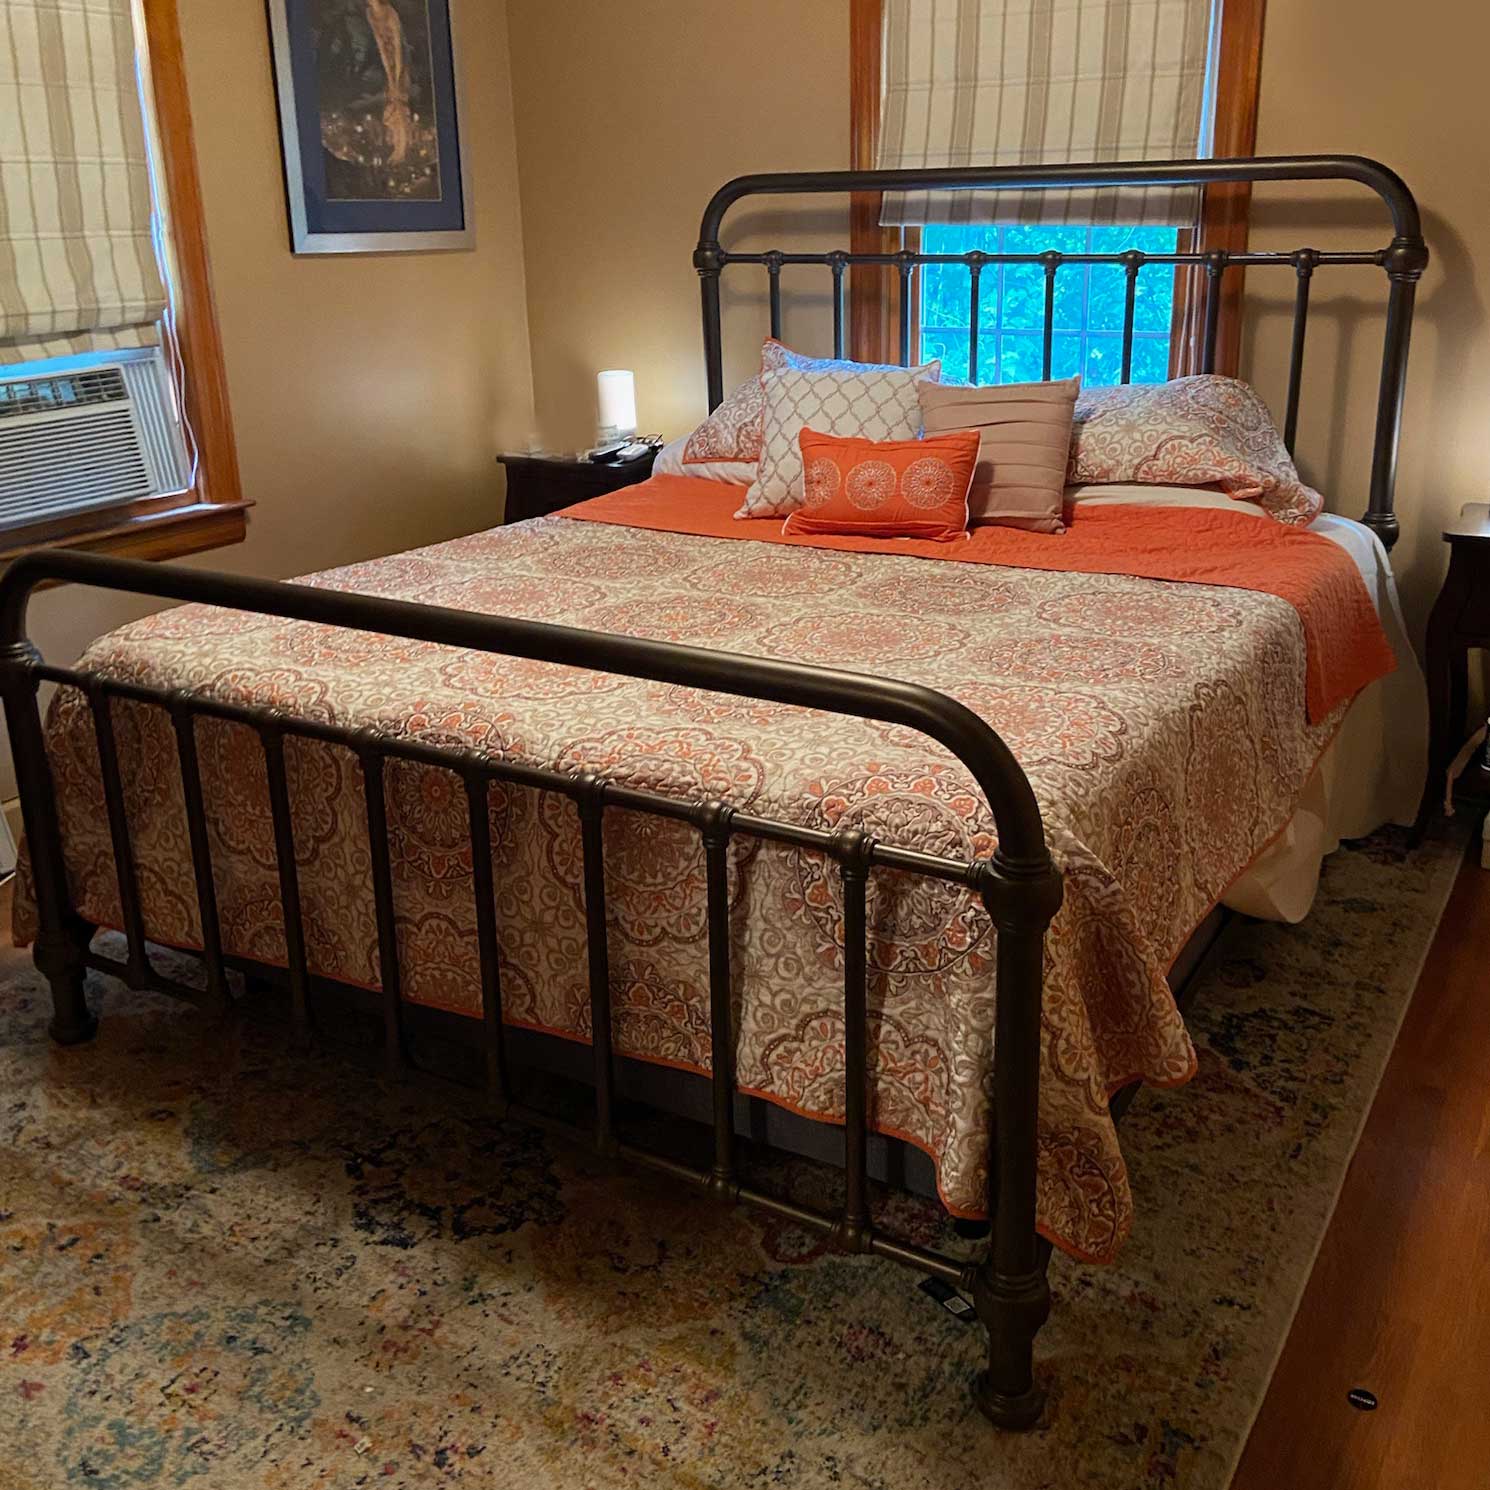 Heiressy Iron Bed 20th c. Americana California King Size in Timeworn Copper Finish on an adjustable bed. Customer Photo